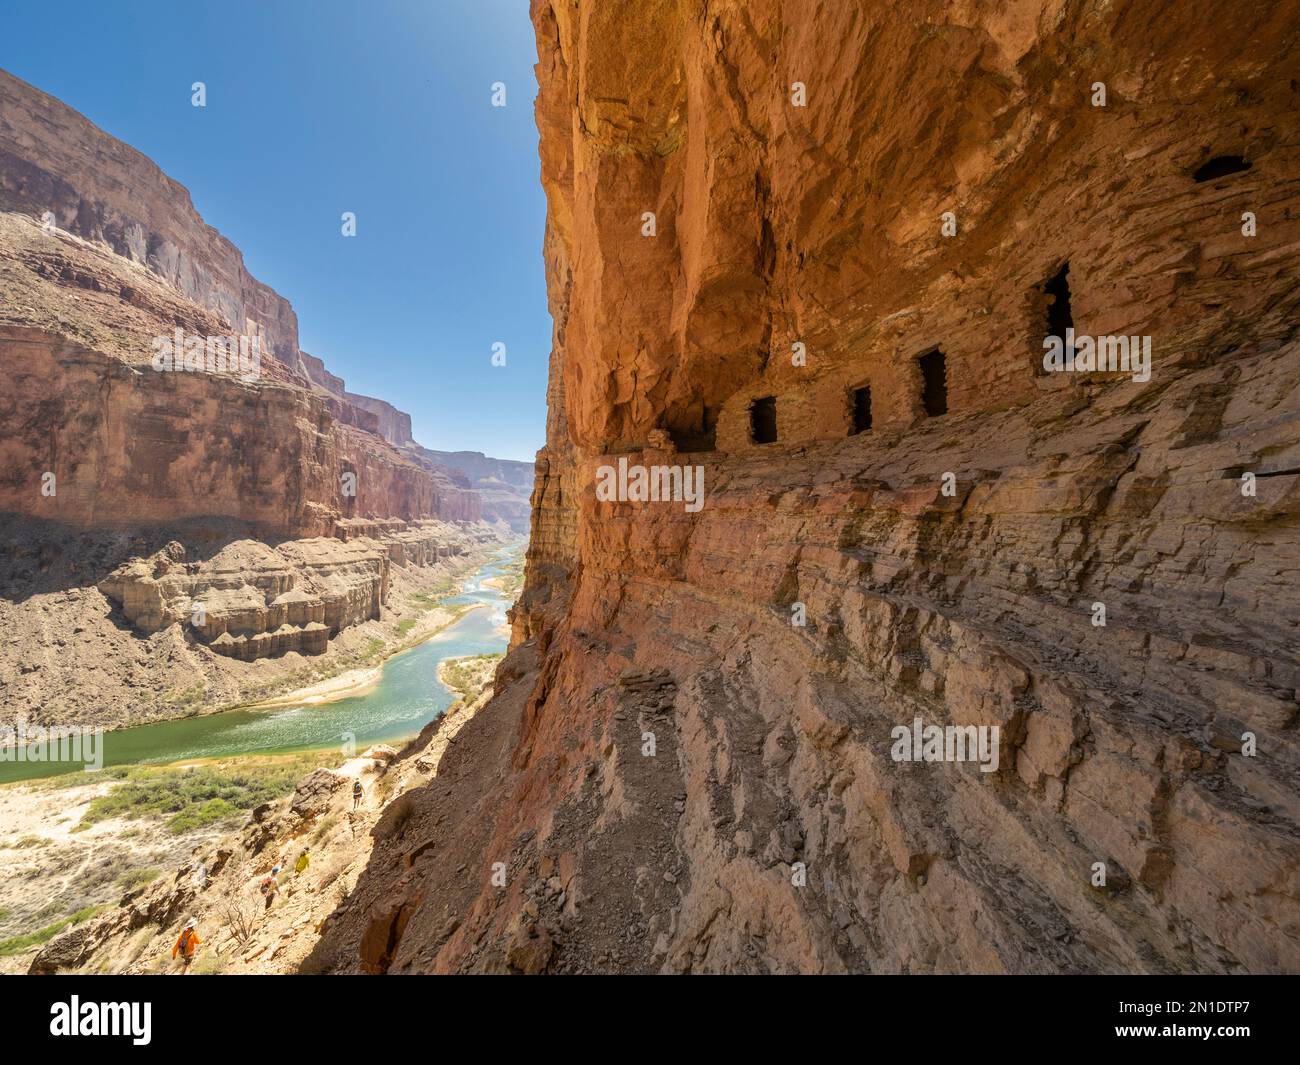 A view of the Puebloan granaries at Upper Nankoweap, Grand Canyon National Park, Arizona, United States of America, North America Stock Photo